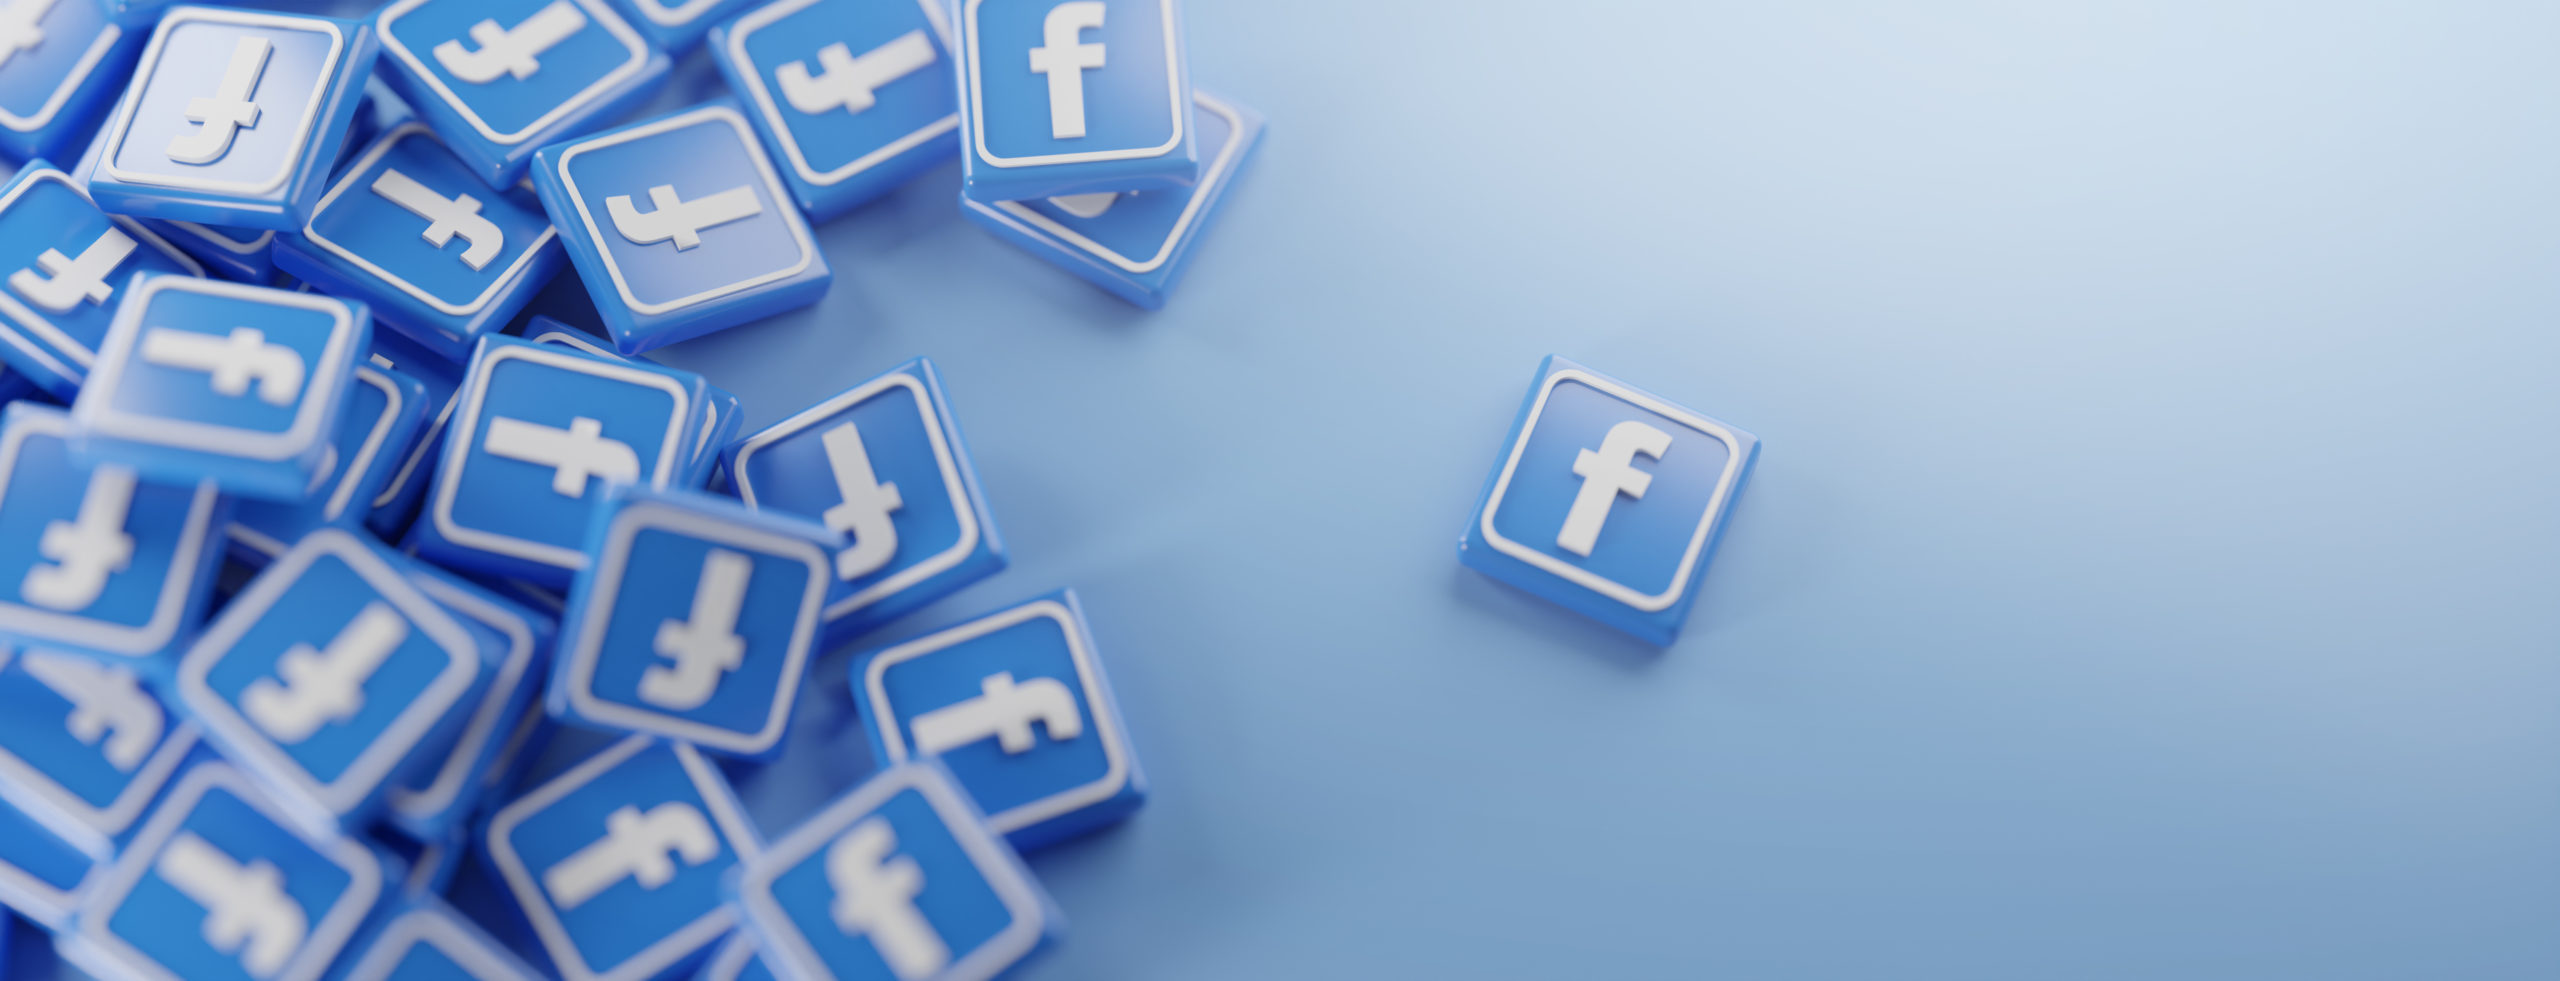 How to use Facebook Groups to grow your business